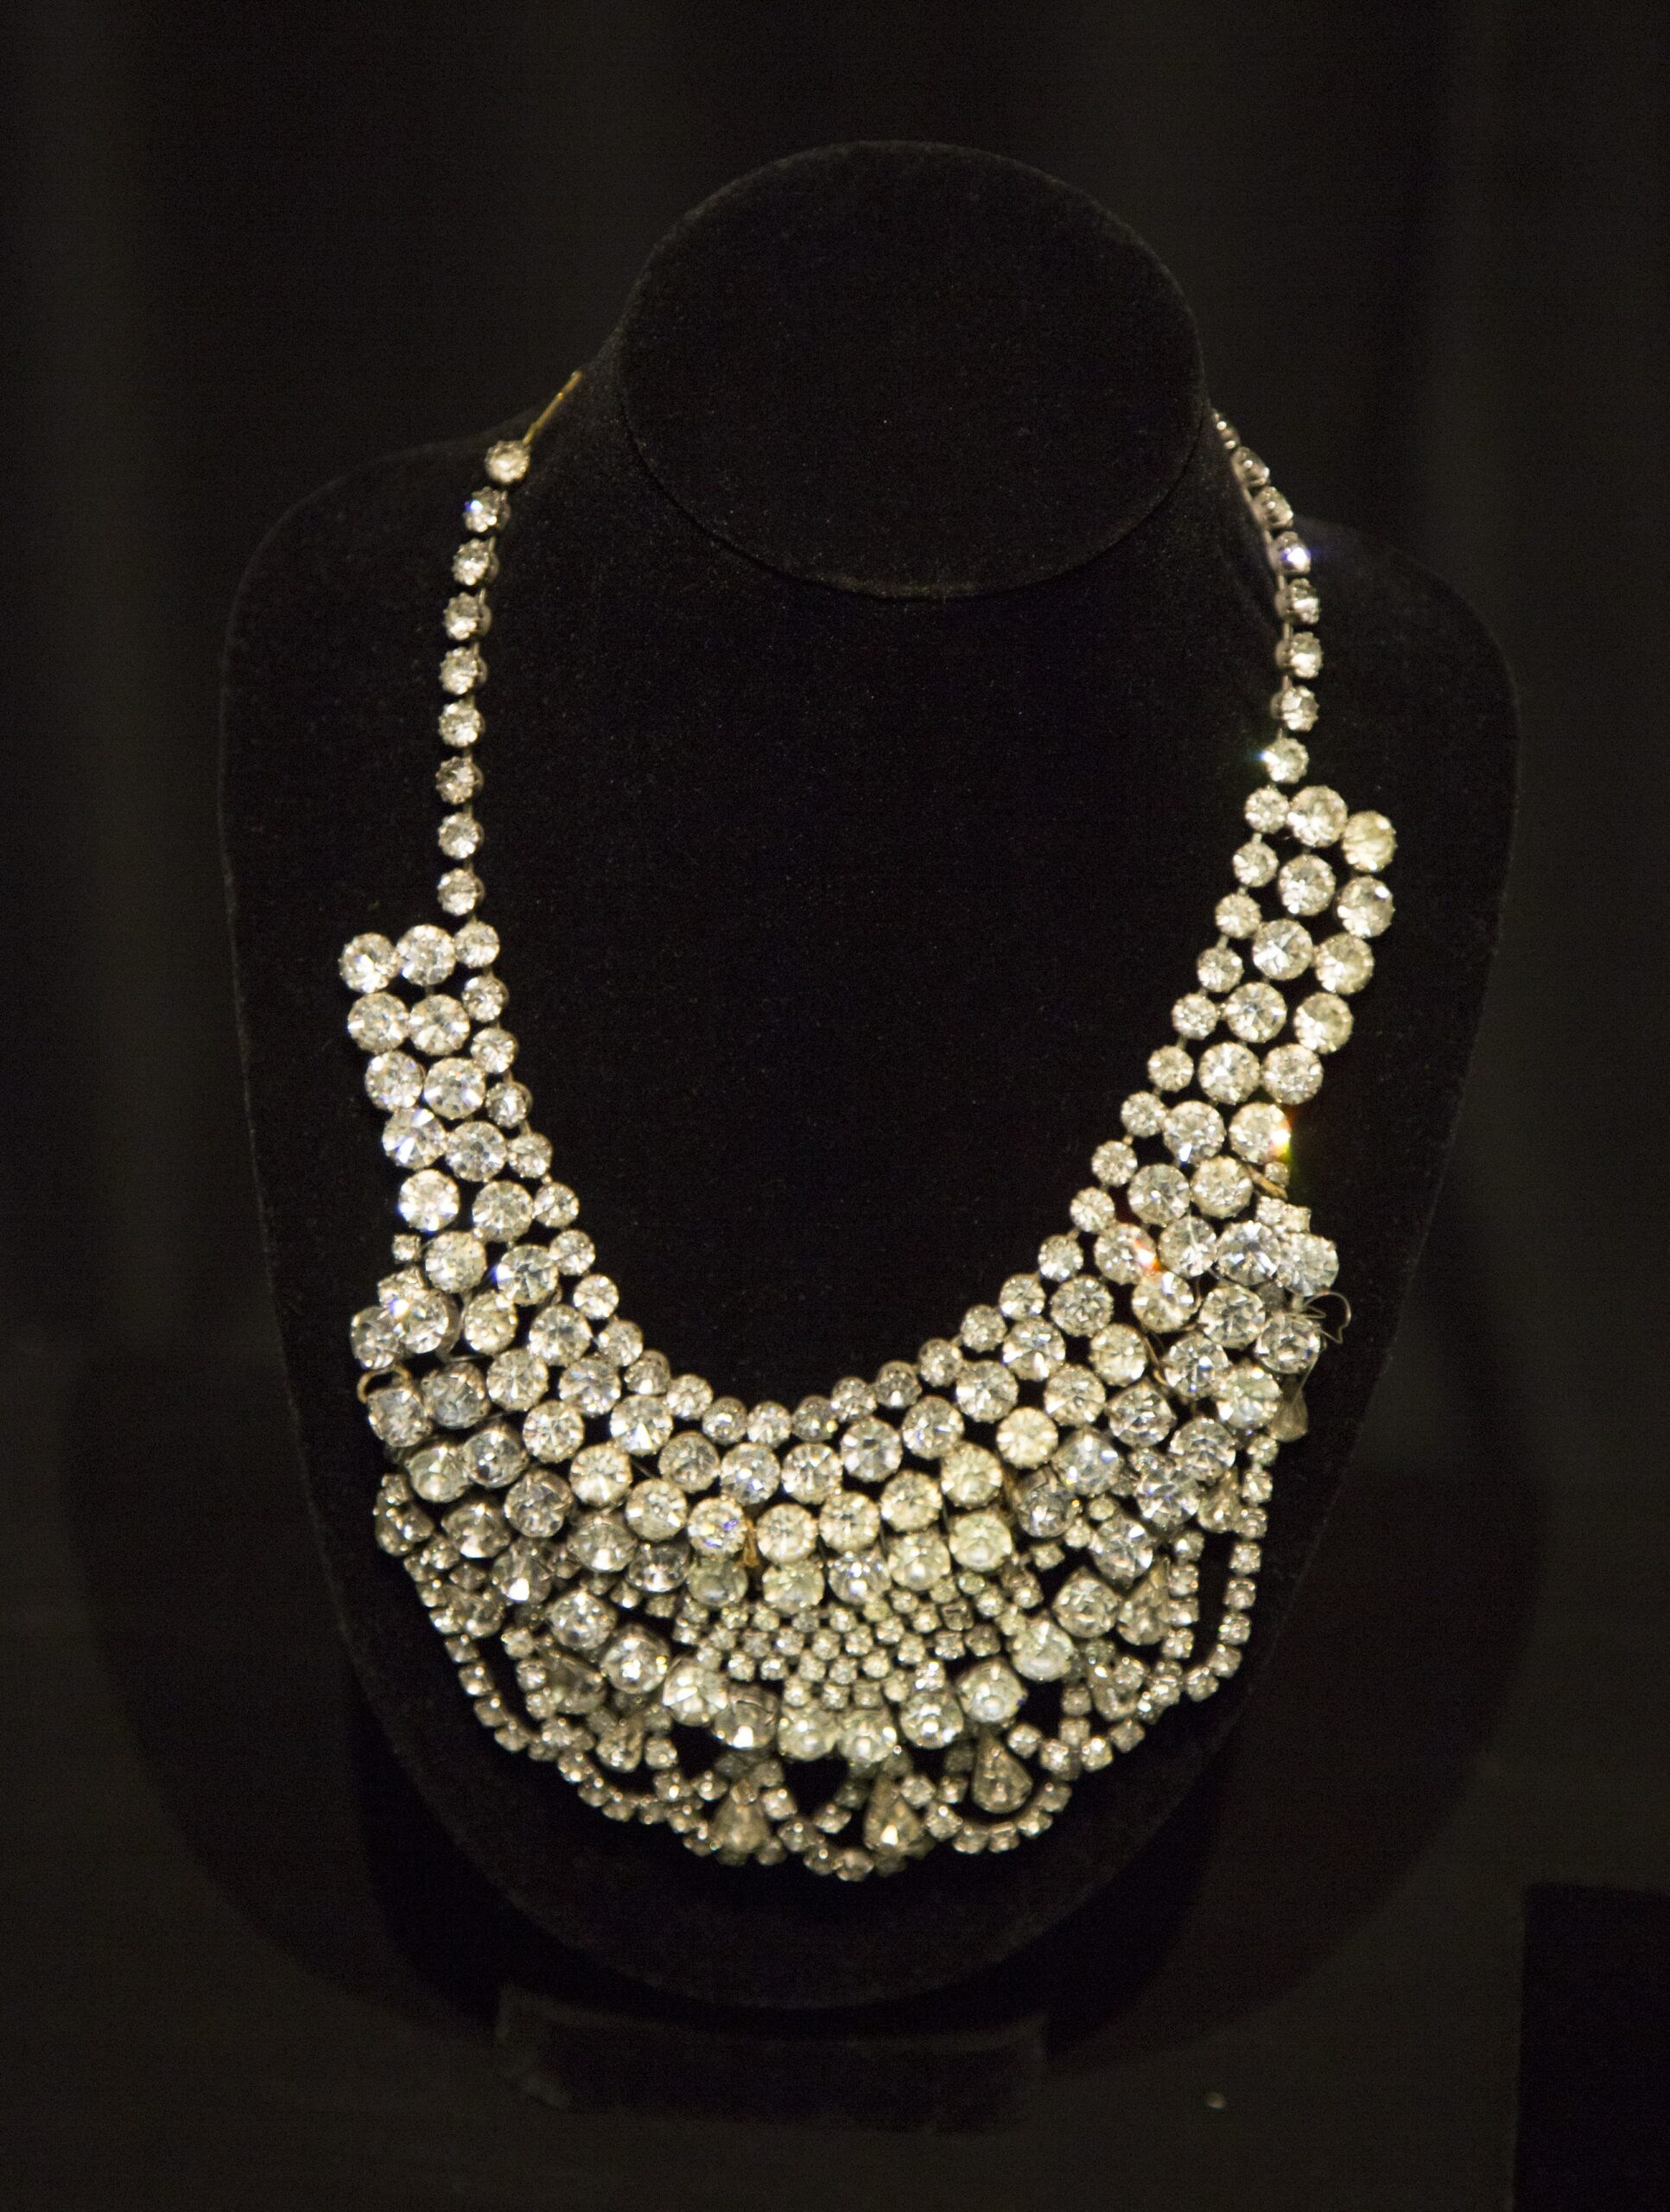 An elaborate and ornate bib style necklace.